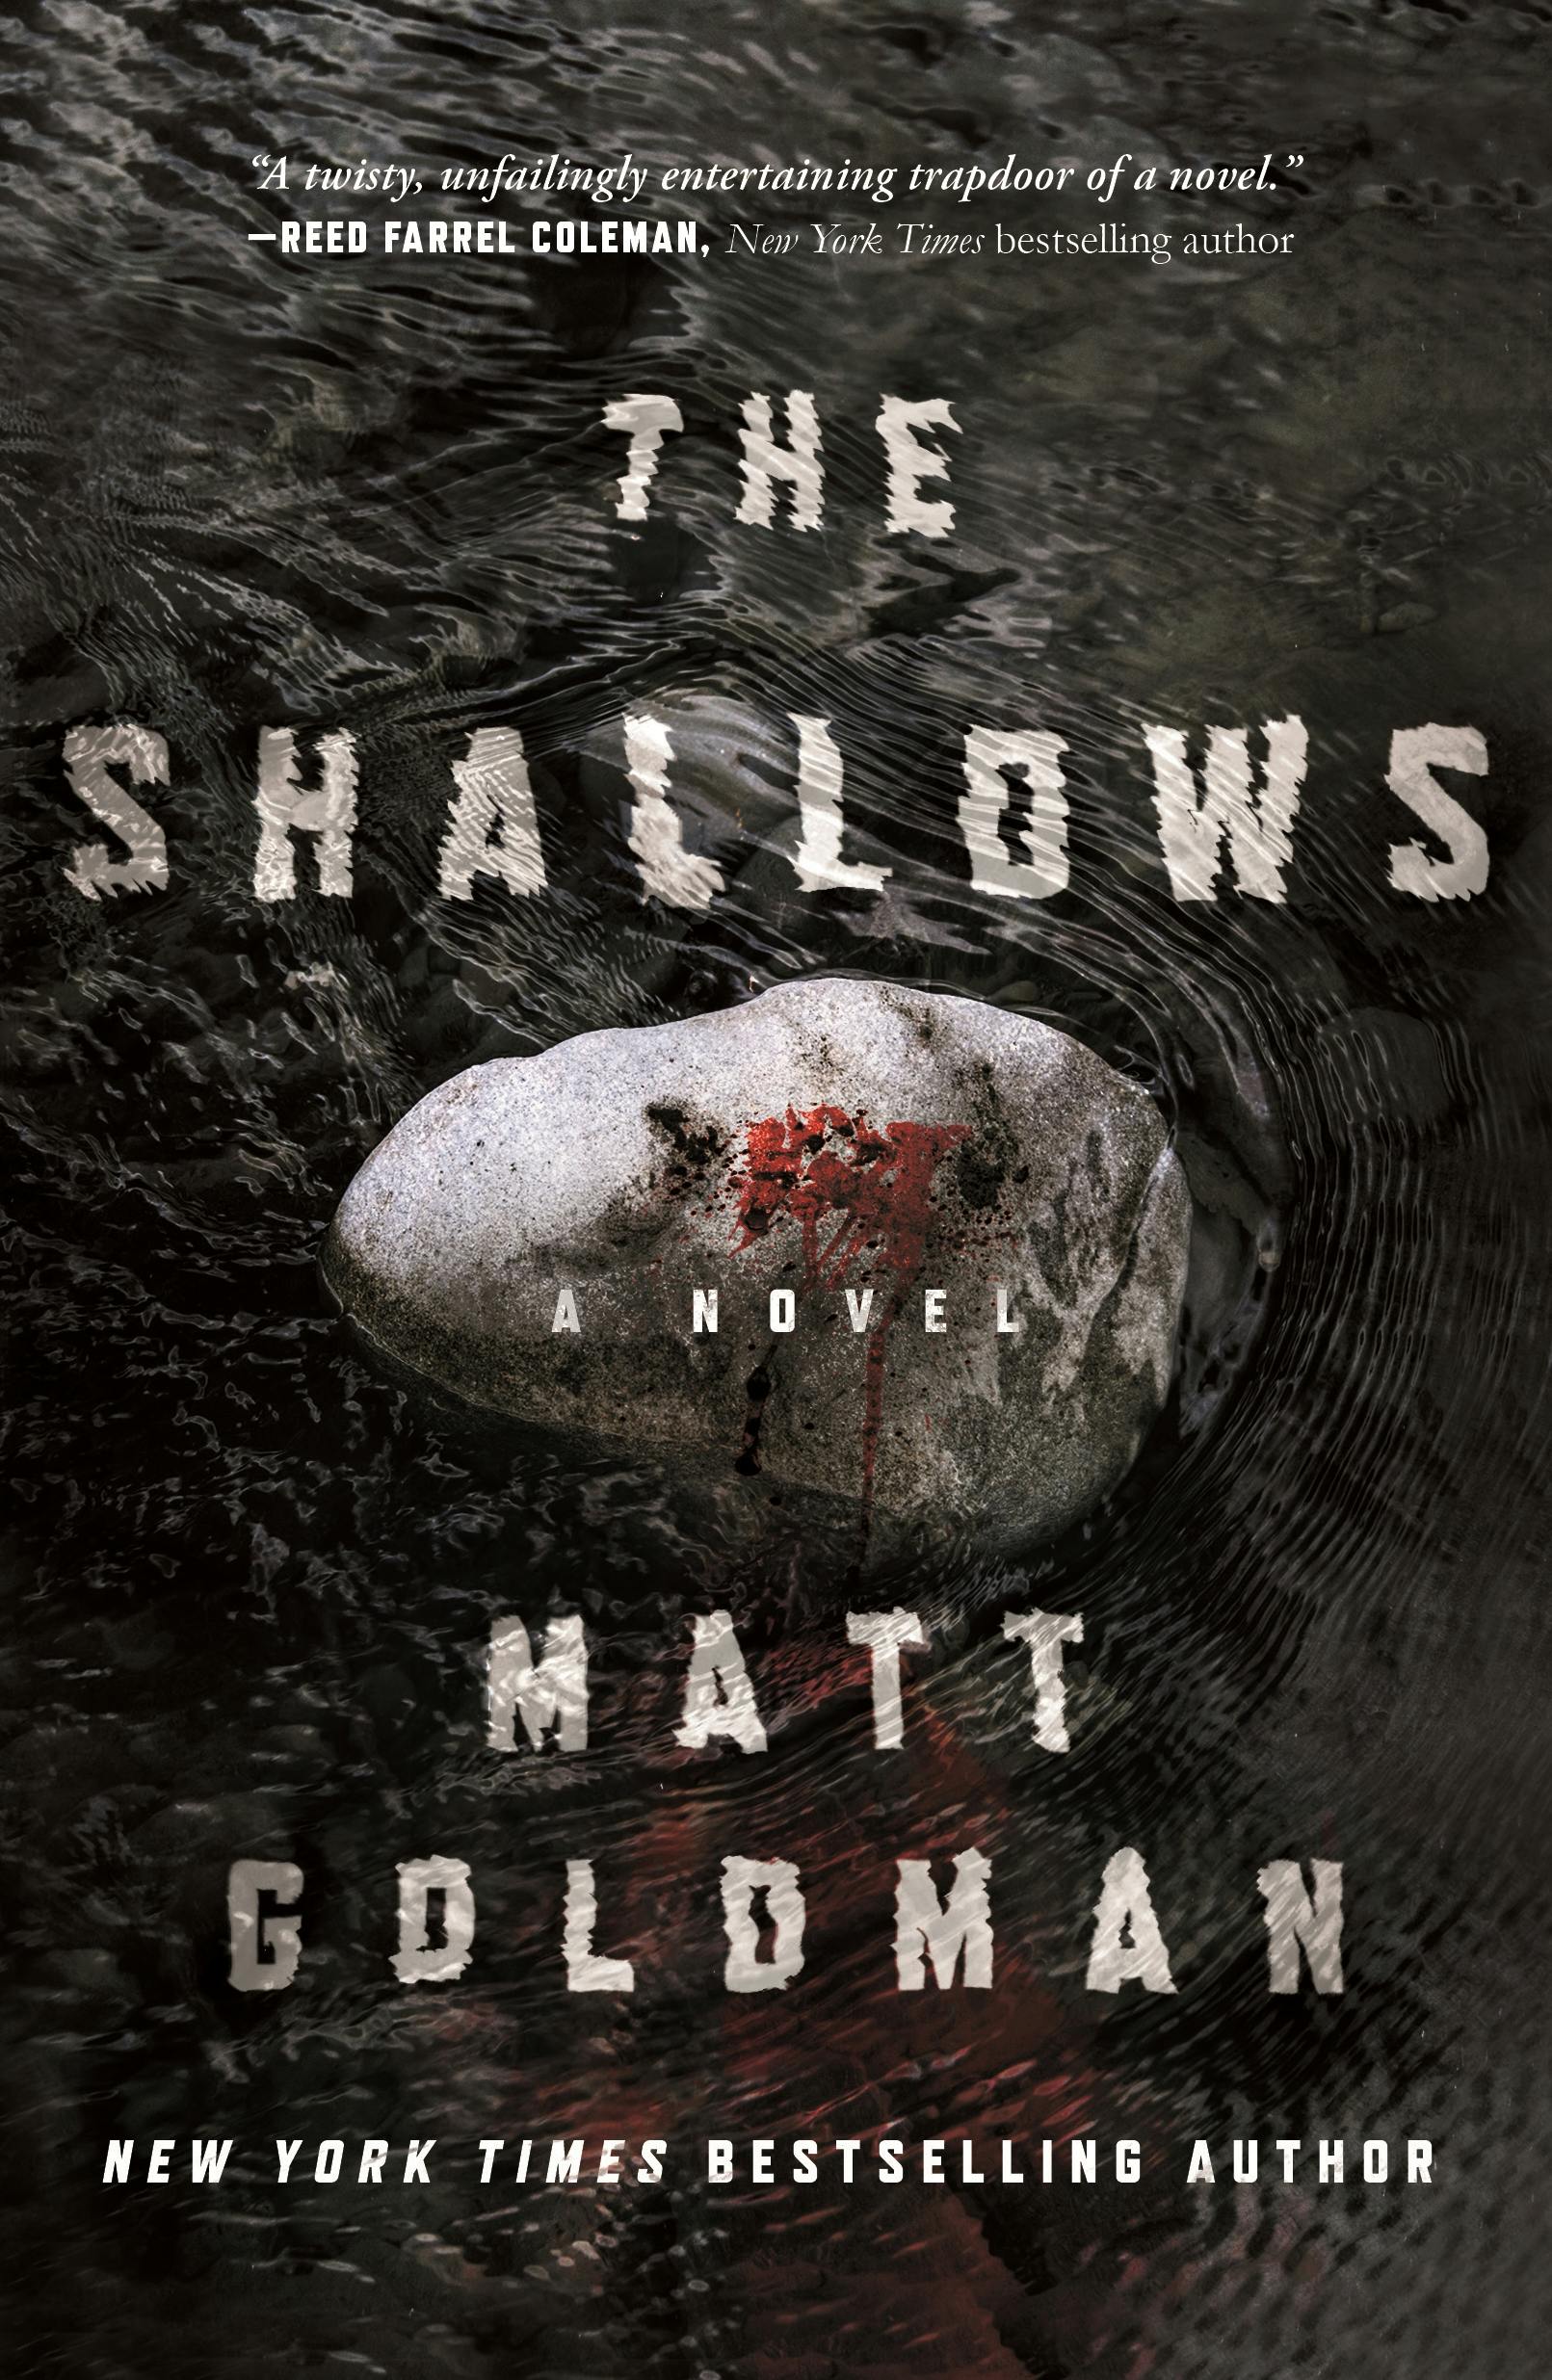 Cover for the book titled as: The Shallows